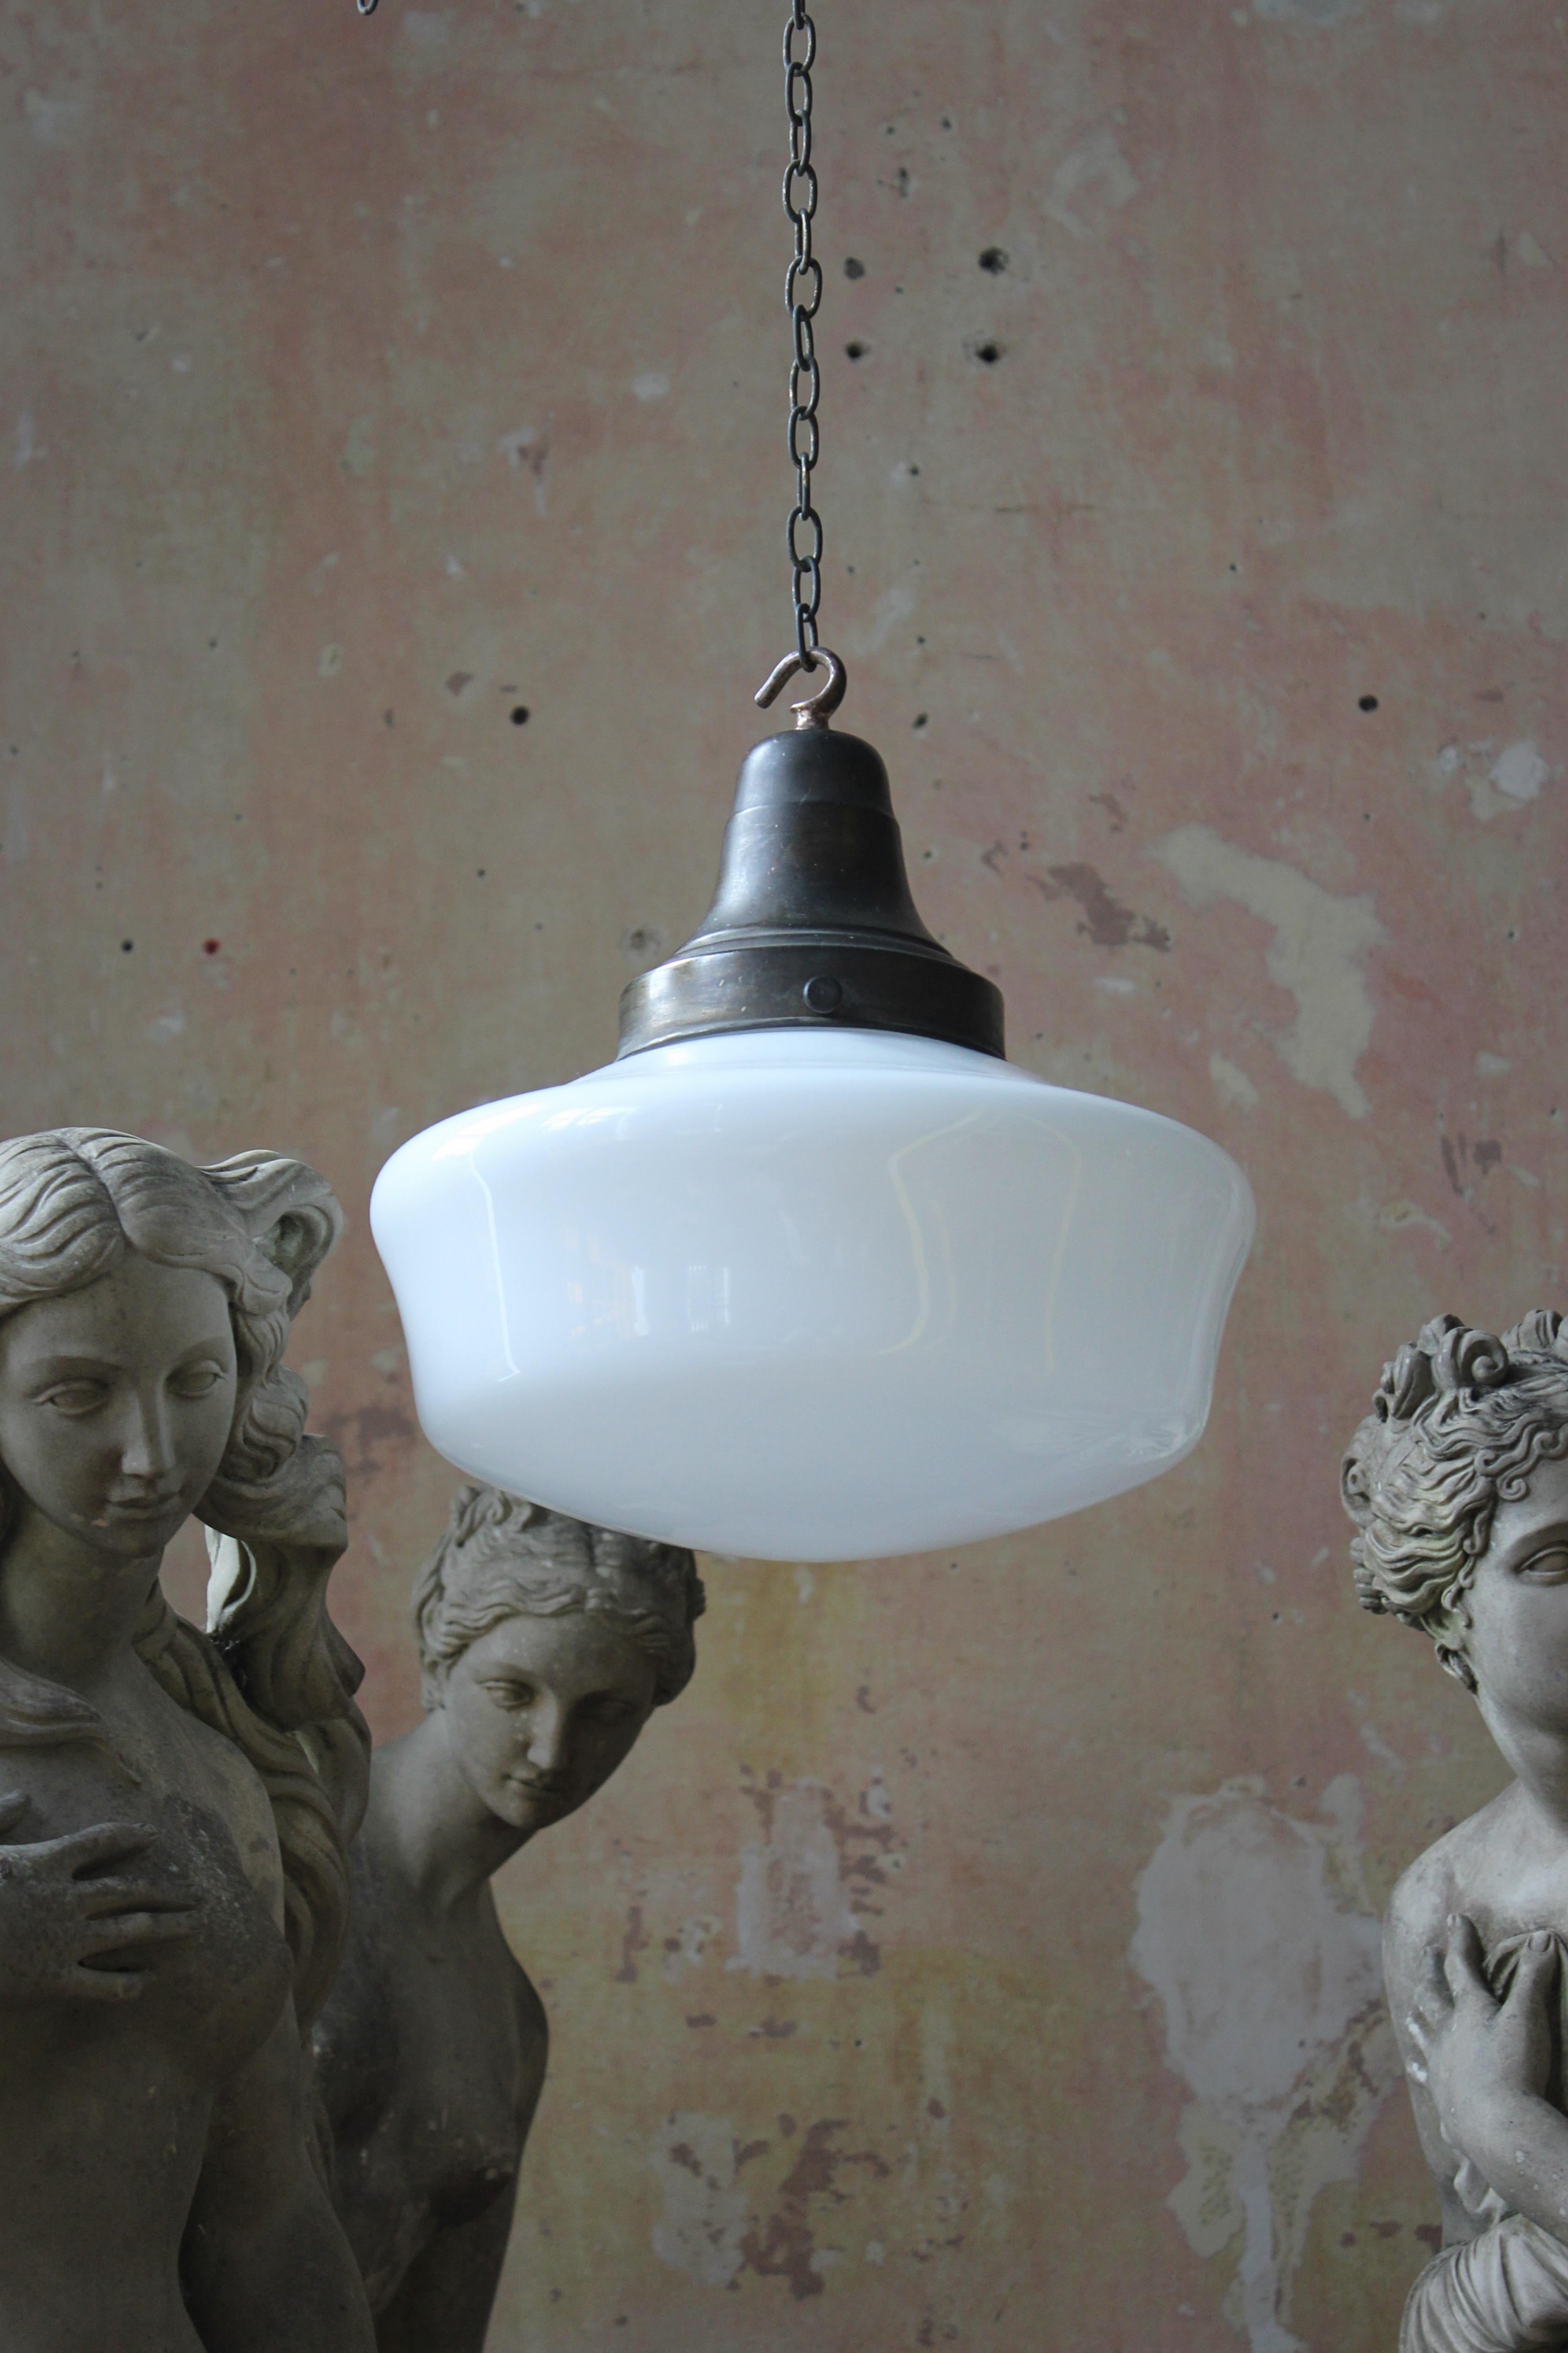 A good glass opaline pendant, with its original decorative brass spun gallery.

The light has its original brass chain approx 60cm in length, comes with a solid brass antique style ceiling hook, three core silk flex and a new b22 bulb holder ready